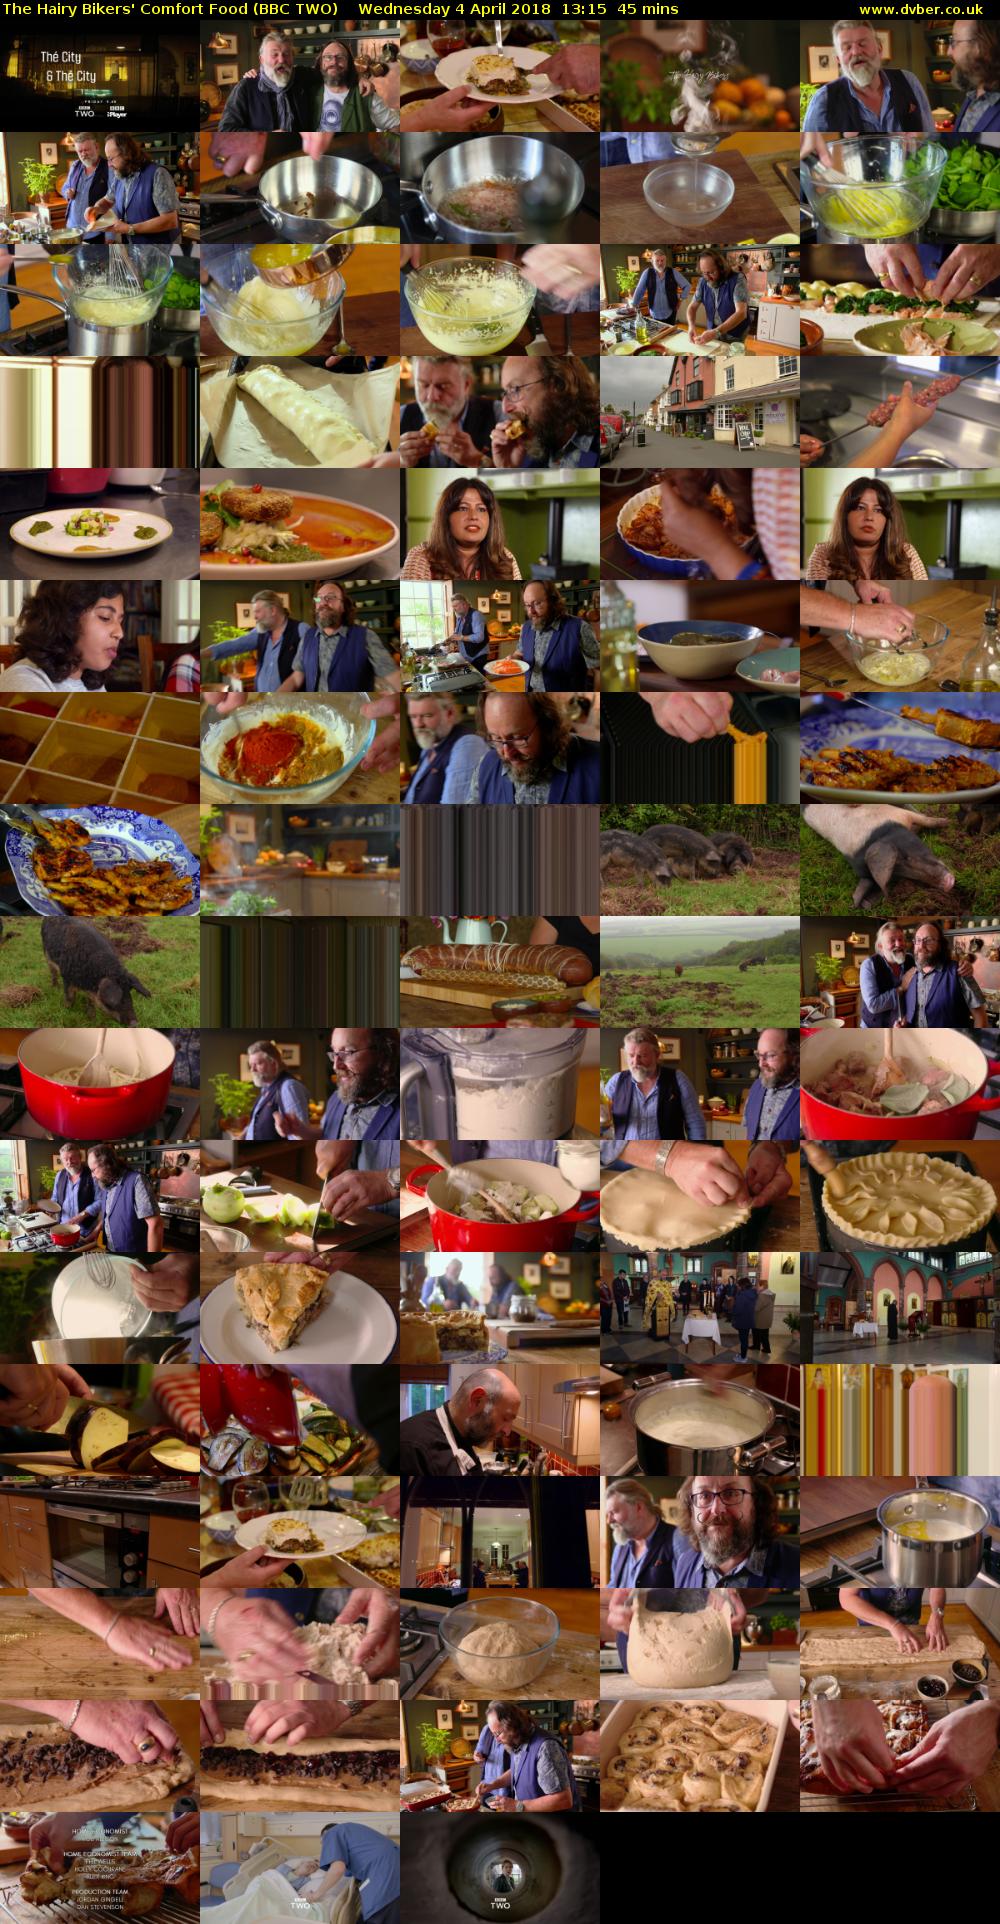 The Hairy Bikers' Comfort Food (BBC TWO) Wednesday 4 April 2018 13:15 - 14:00